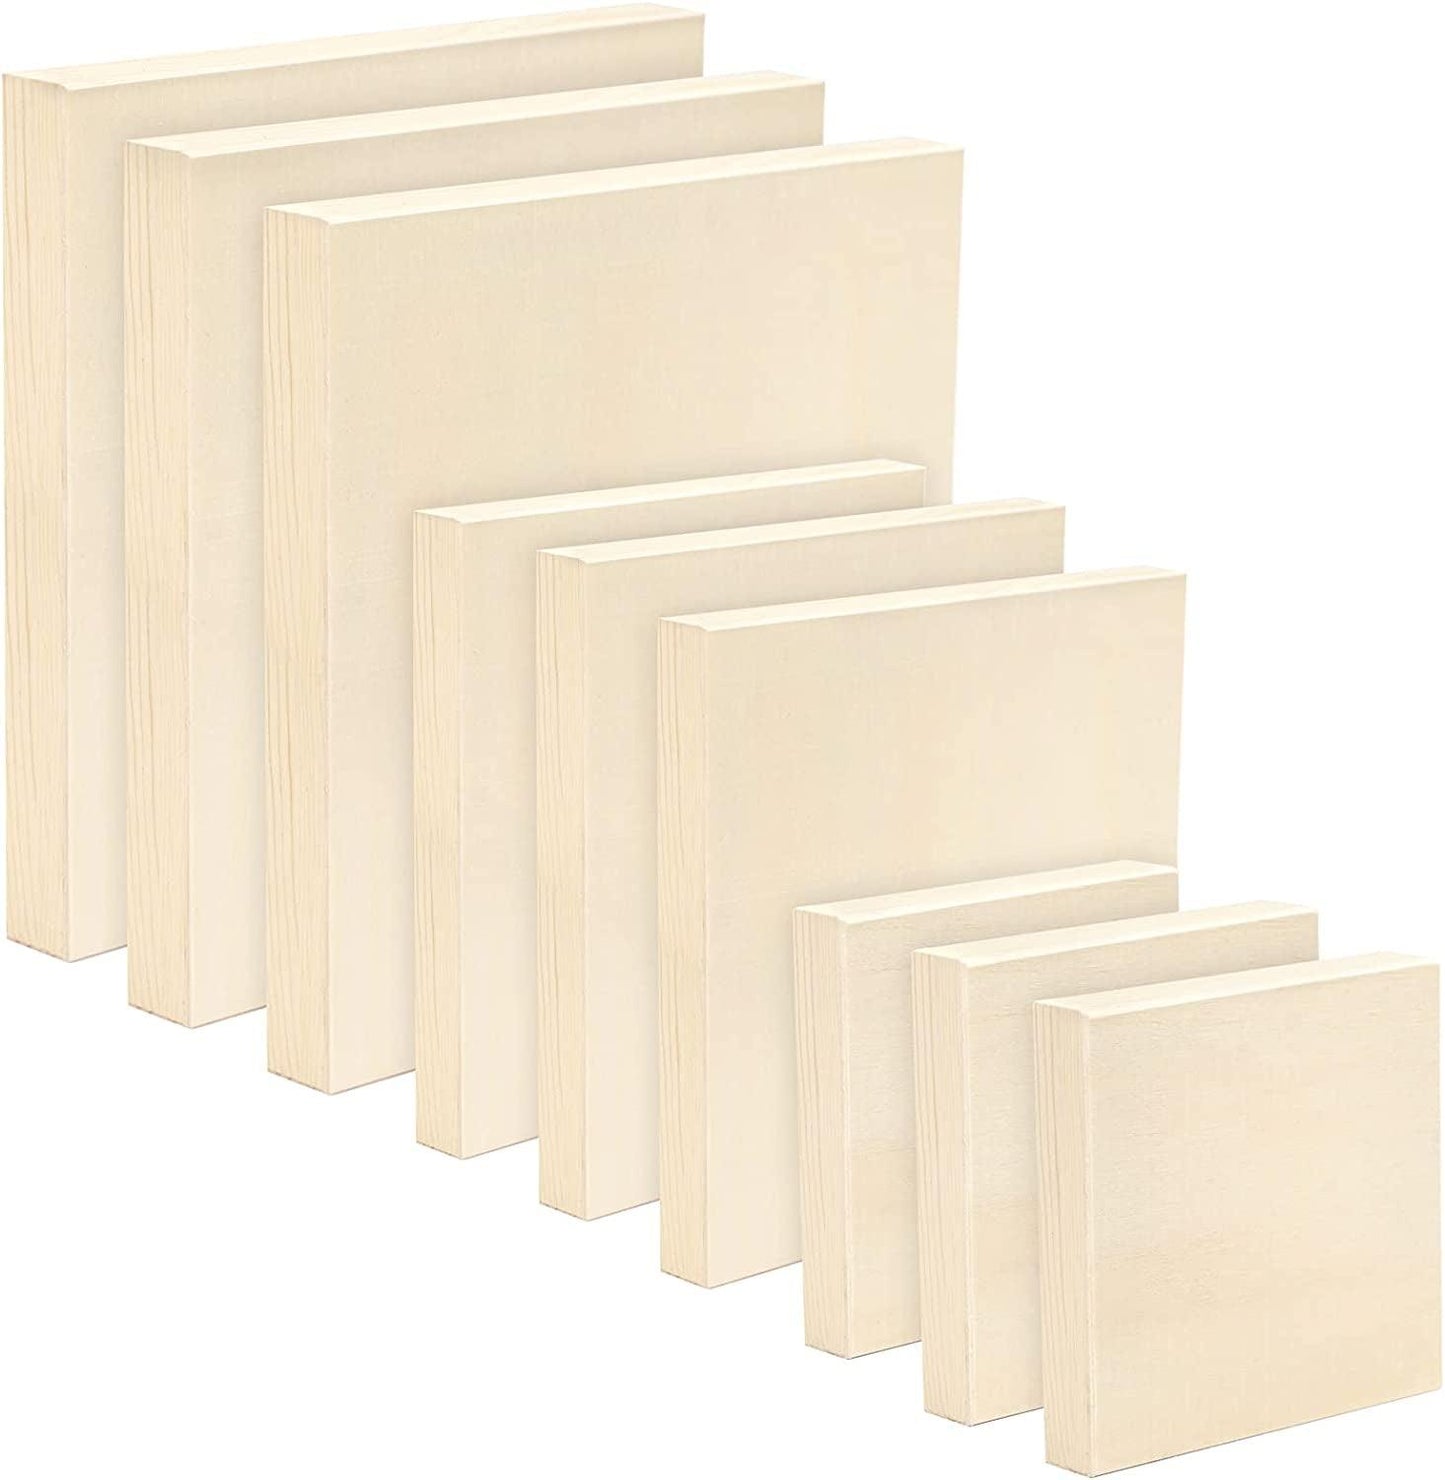 9 Pack 3 Sizes Wood Canvas Board, Unfinished Wood Cradled Painting Panel Boards Art, 4’’, 6’’, 8’’ - WoodArtSupply